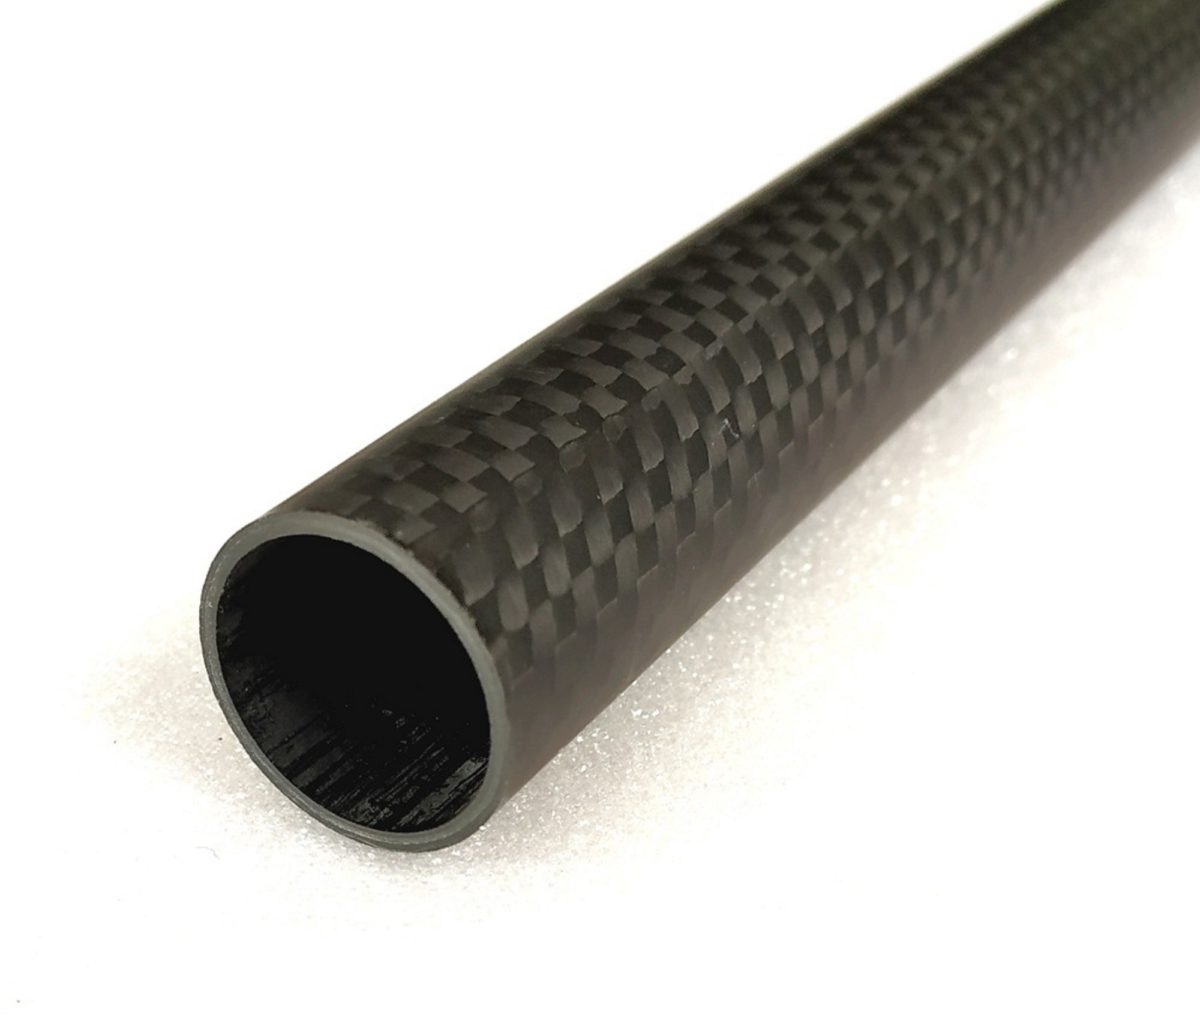 uxcell Carbon Fiber Tube 8x6x330mm for RC Airplane Quadcopter Black Tube 3K Roll Wrapped Glossy Surface 2pcs 